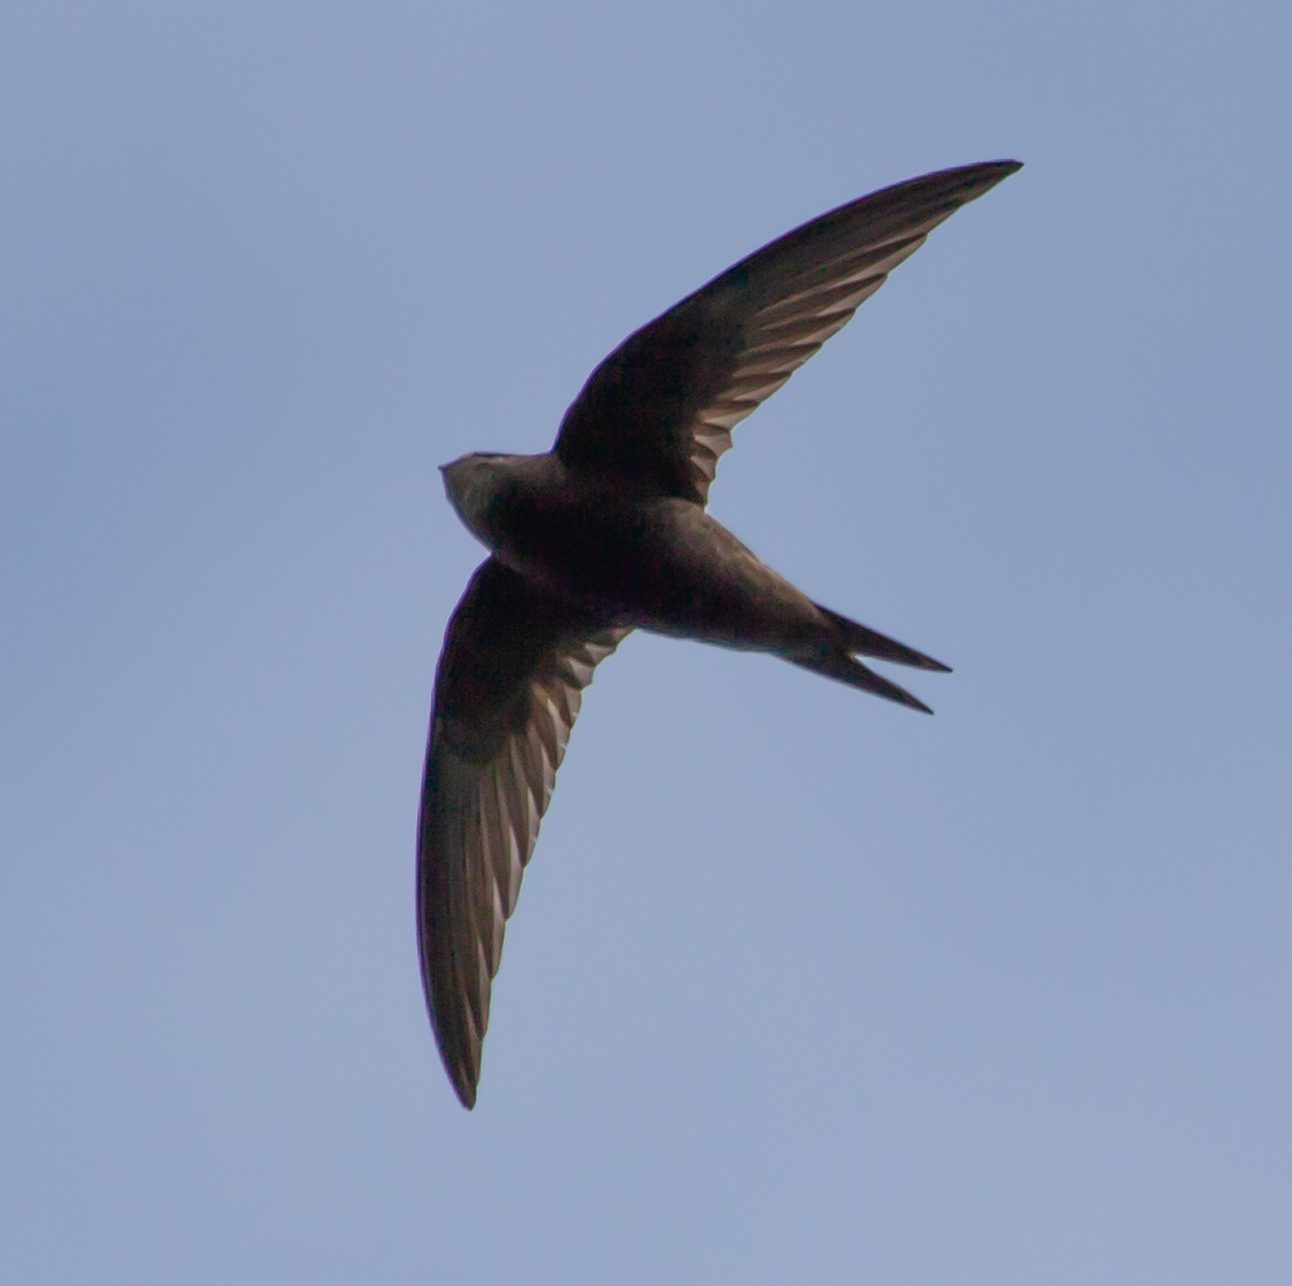 A swift flying against a blue sky background